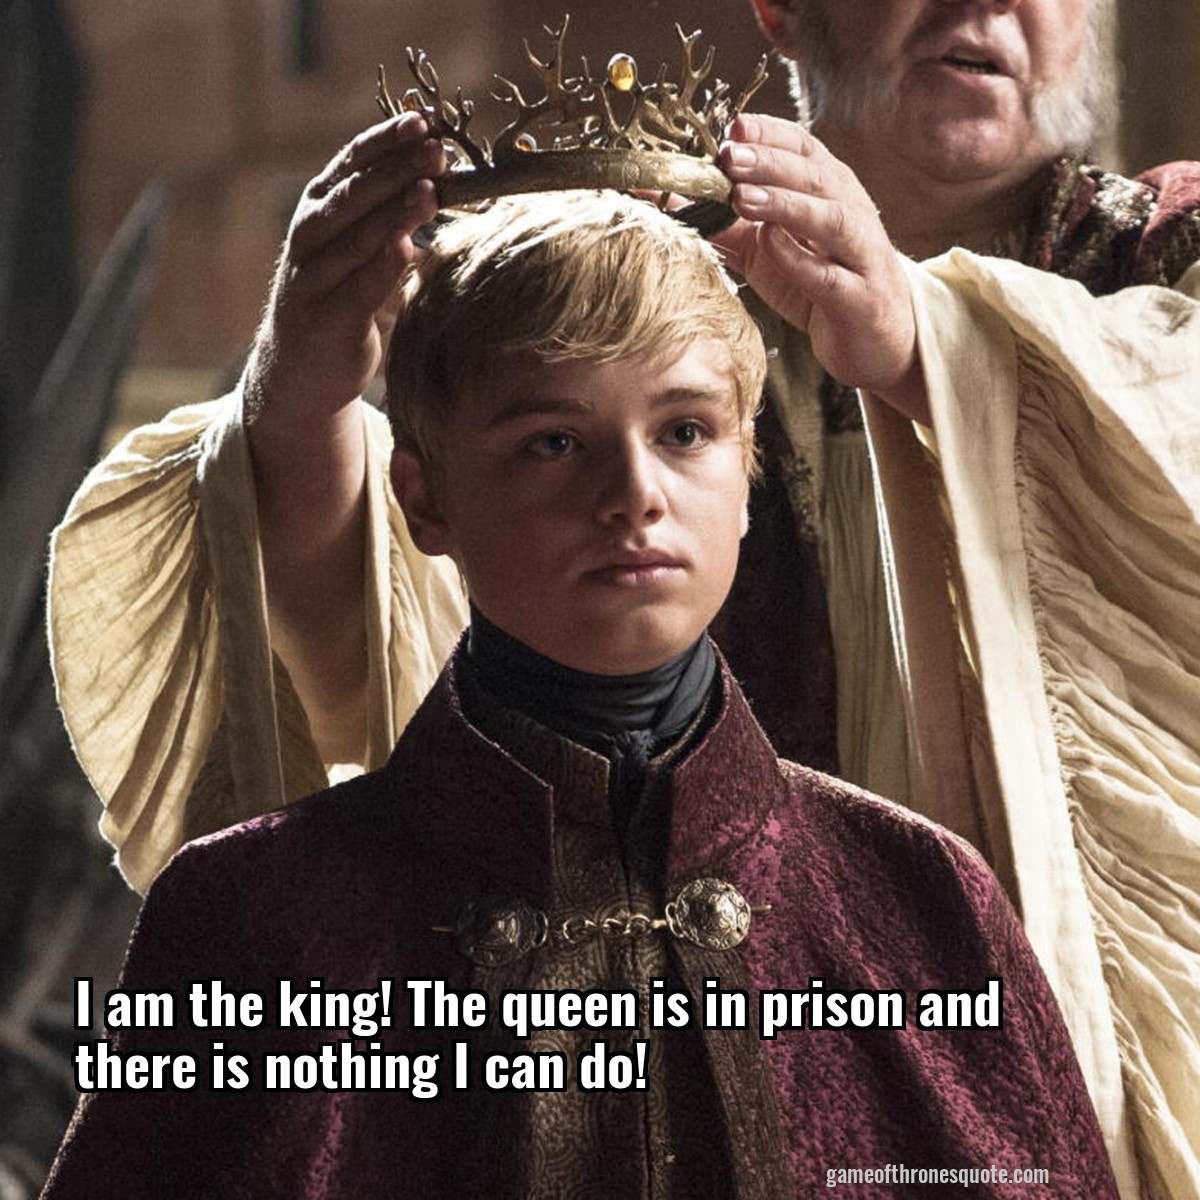 I am the king! The queen is in prison and there is nothing I can do!